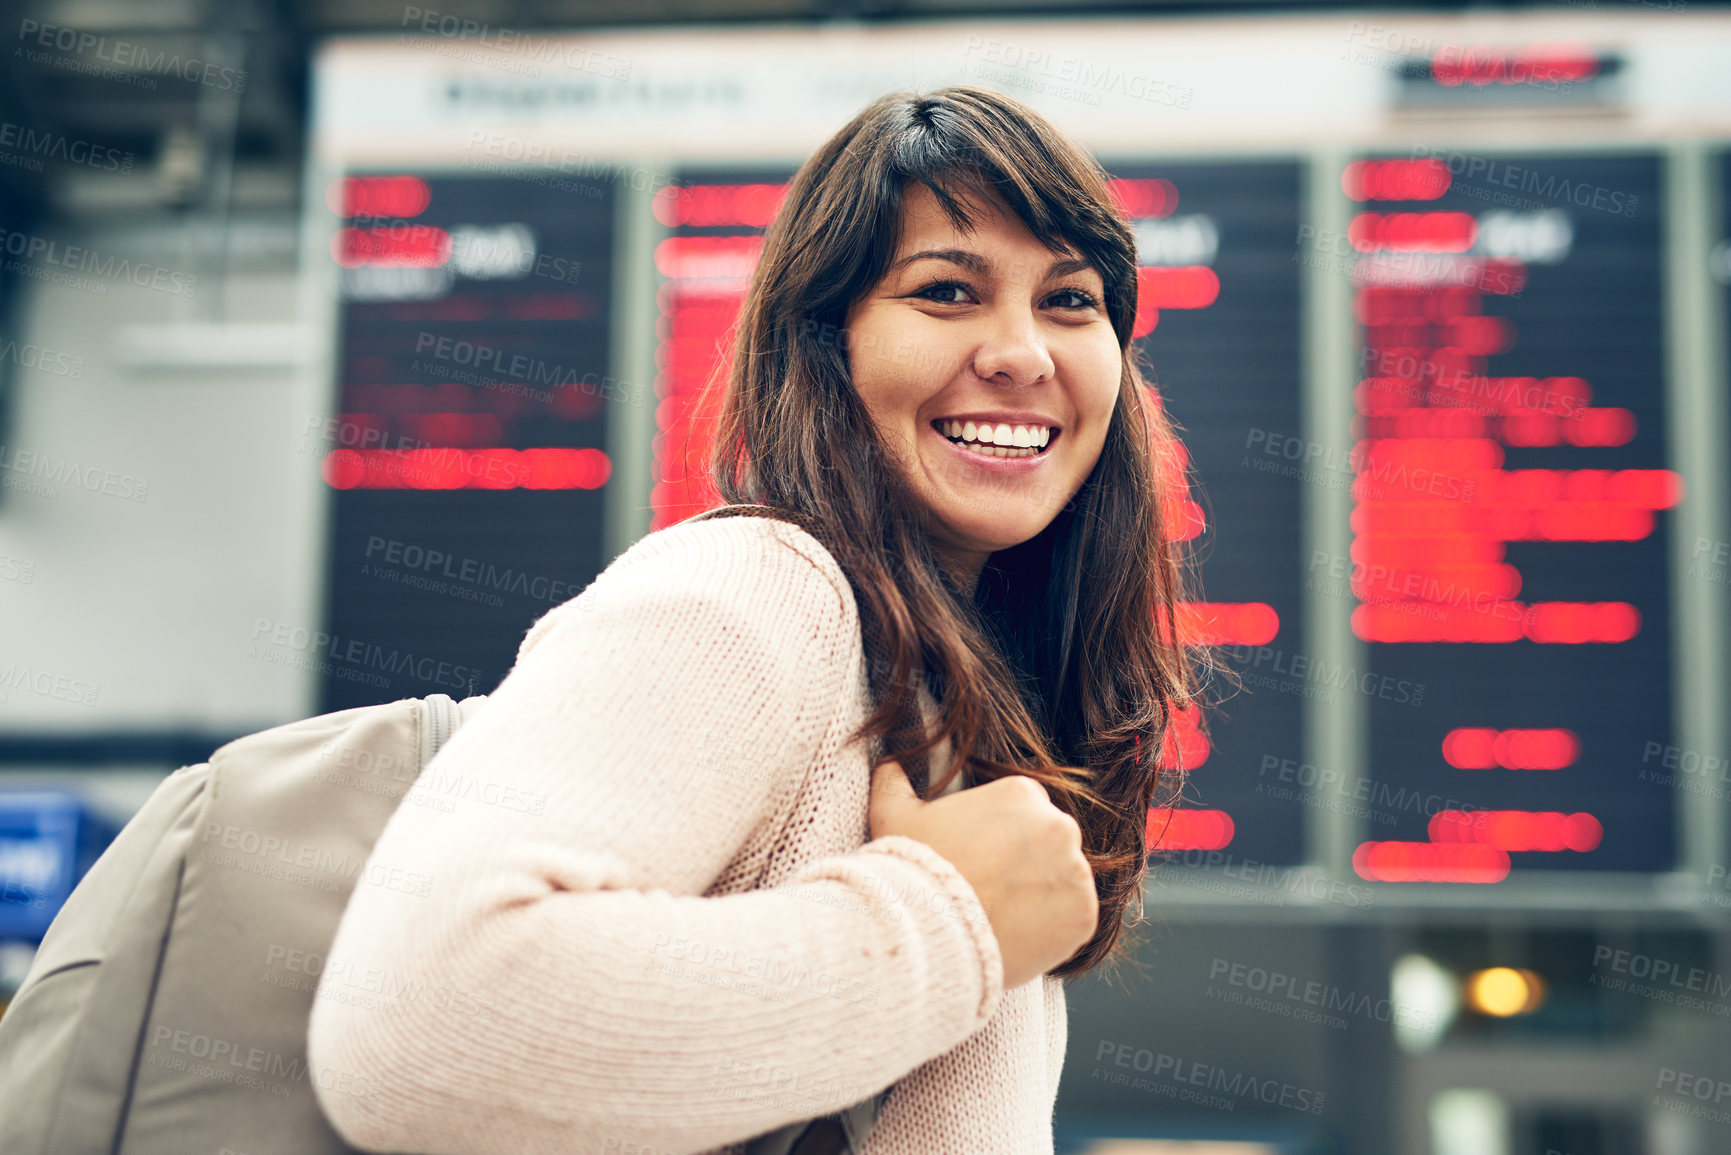 Buy stock photo Cropped portrait of an attractive young woman standing at an arrivals and departures board in the airport